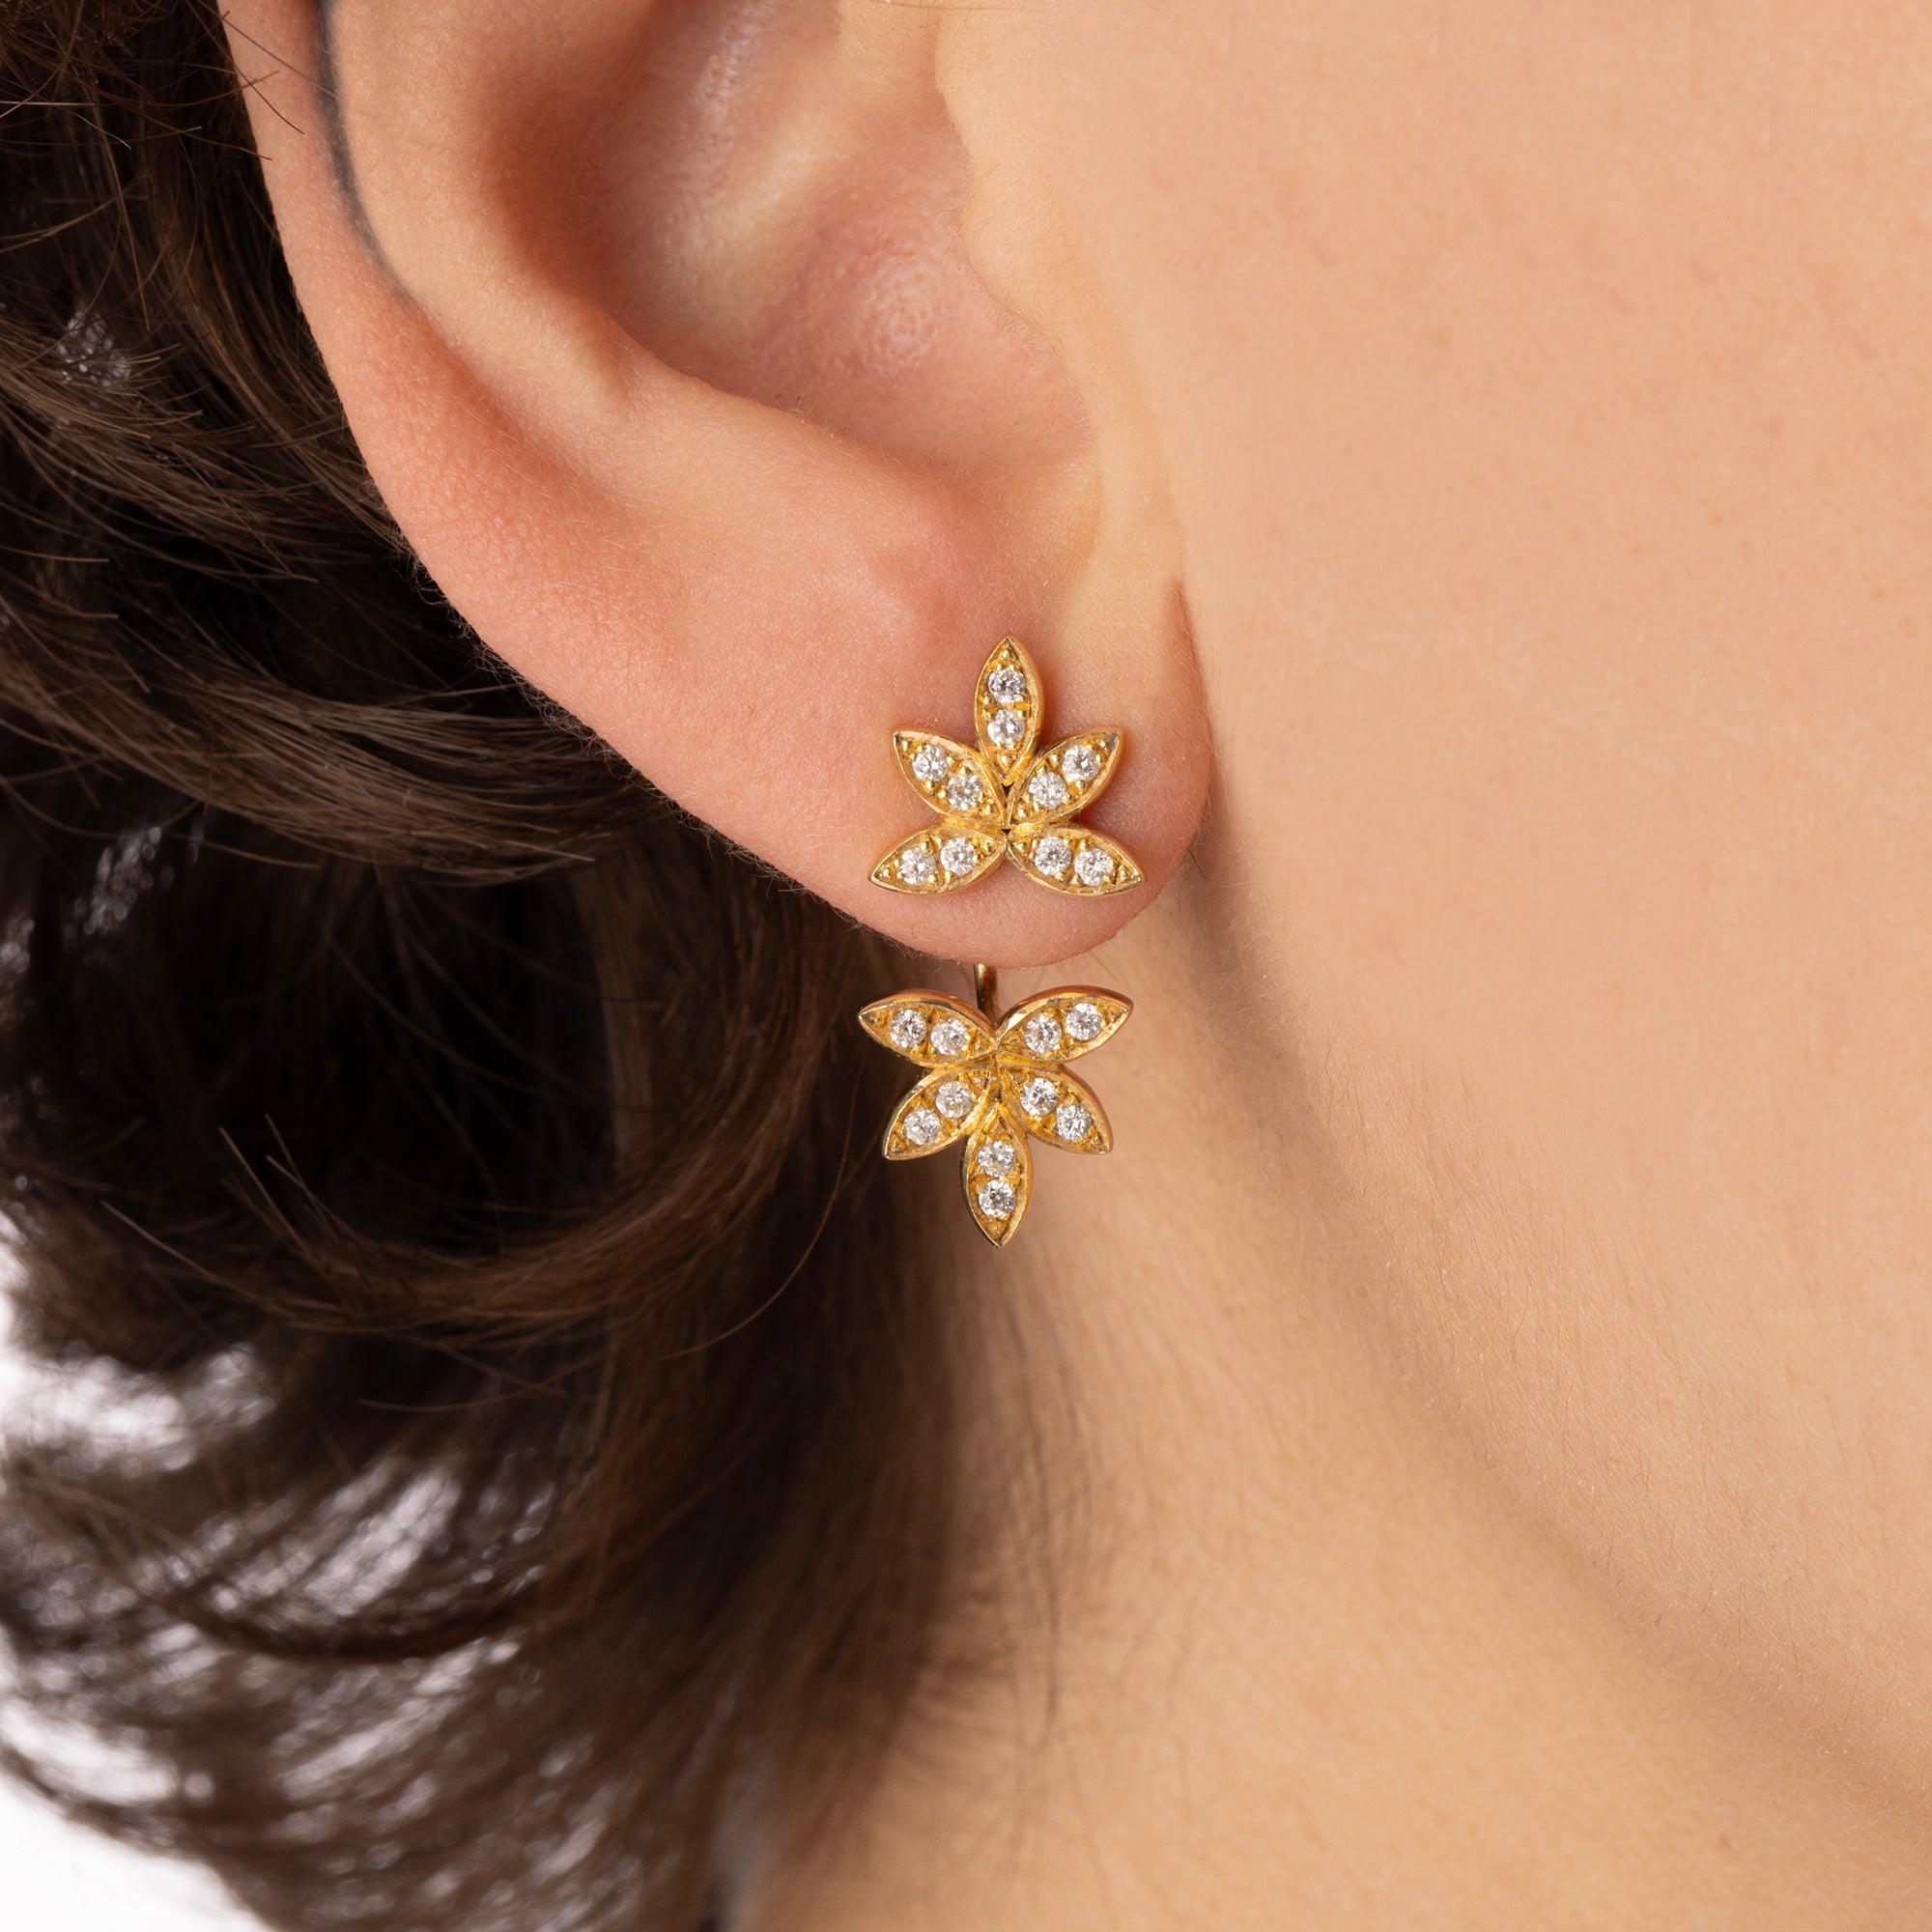 Boucle d'oreille Small Leaves Or Jaune